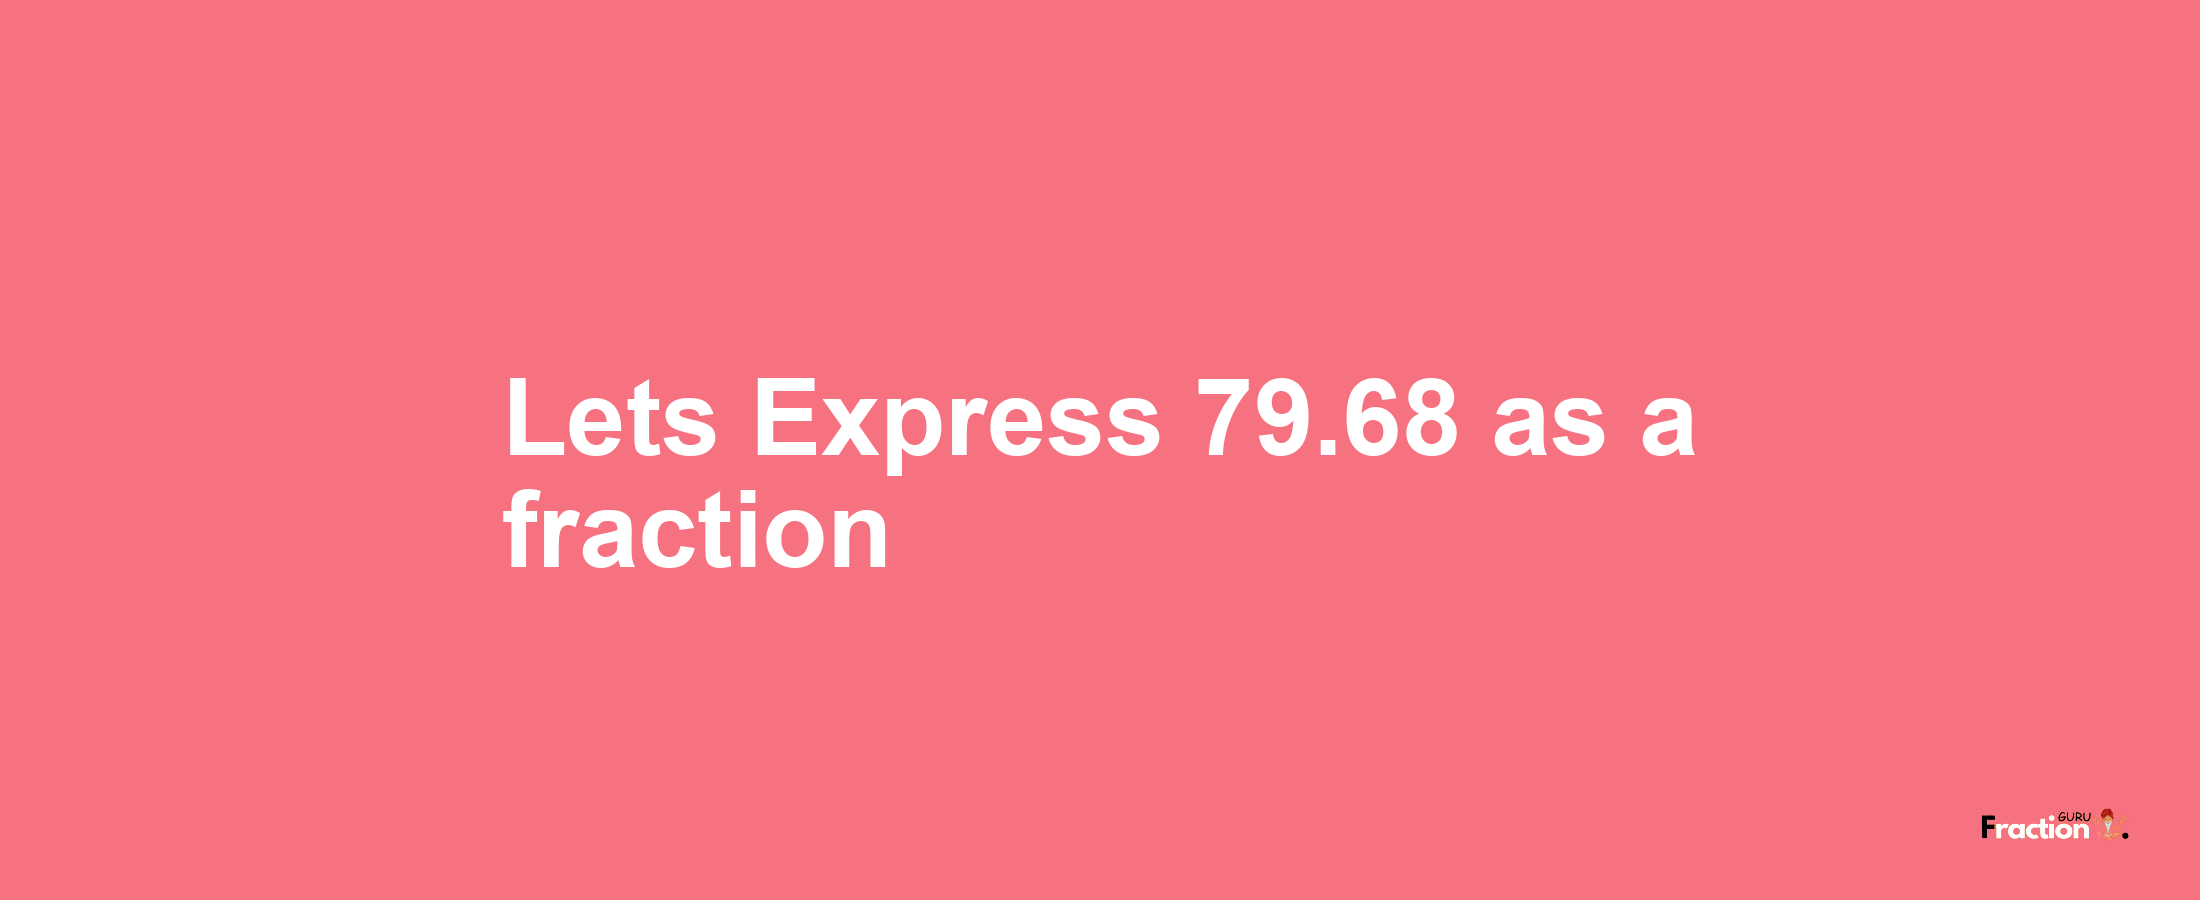 Lets Express 79.68 as afraction